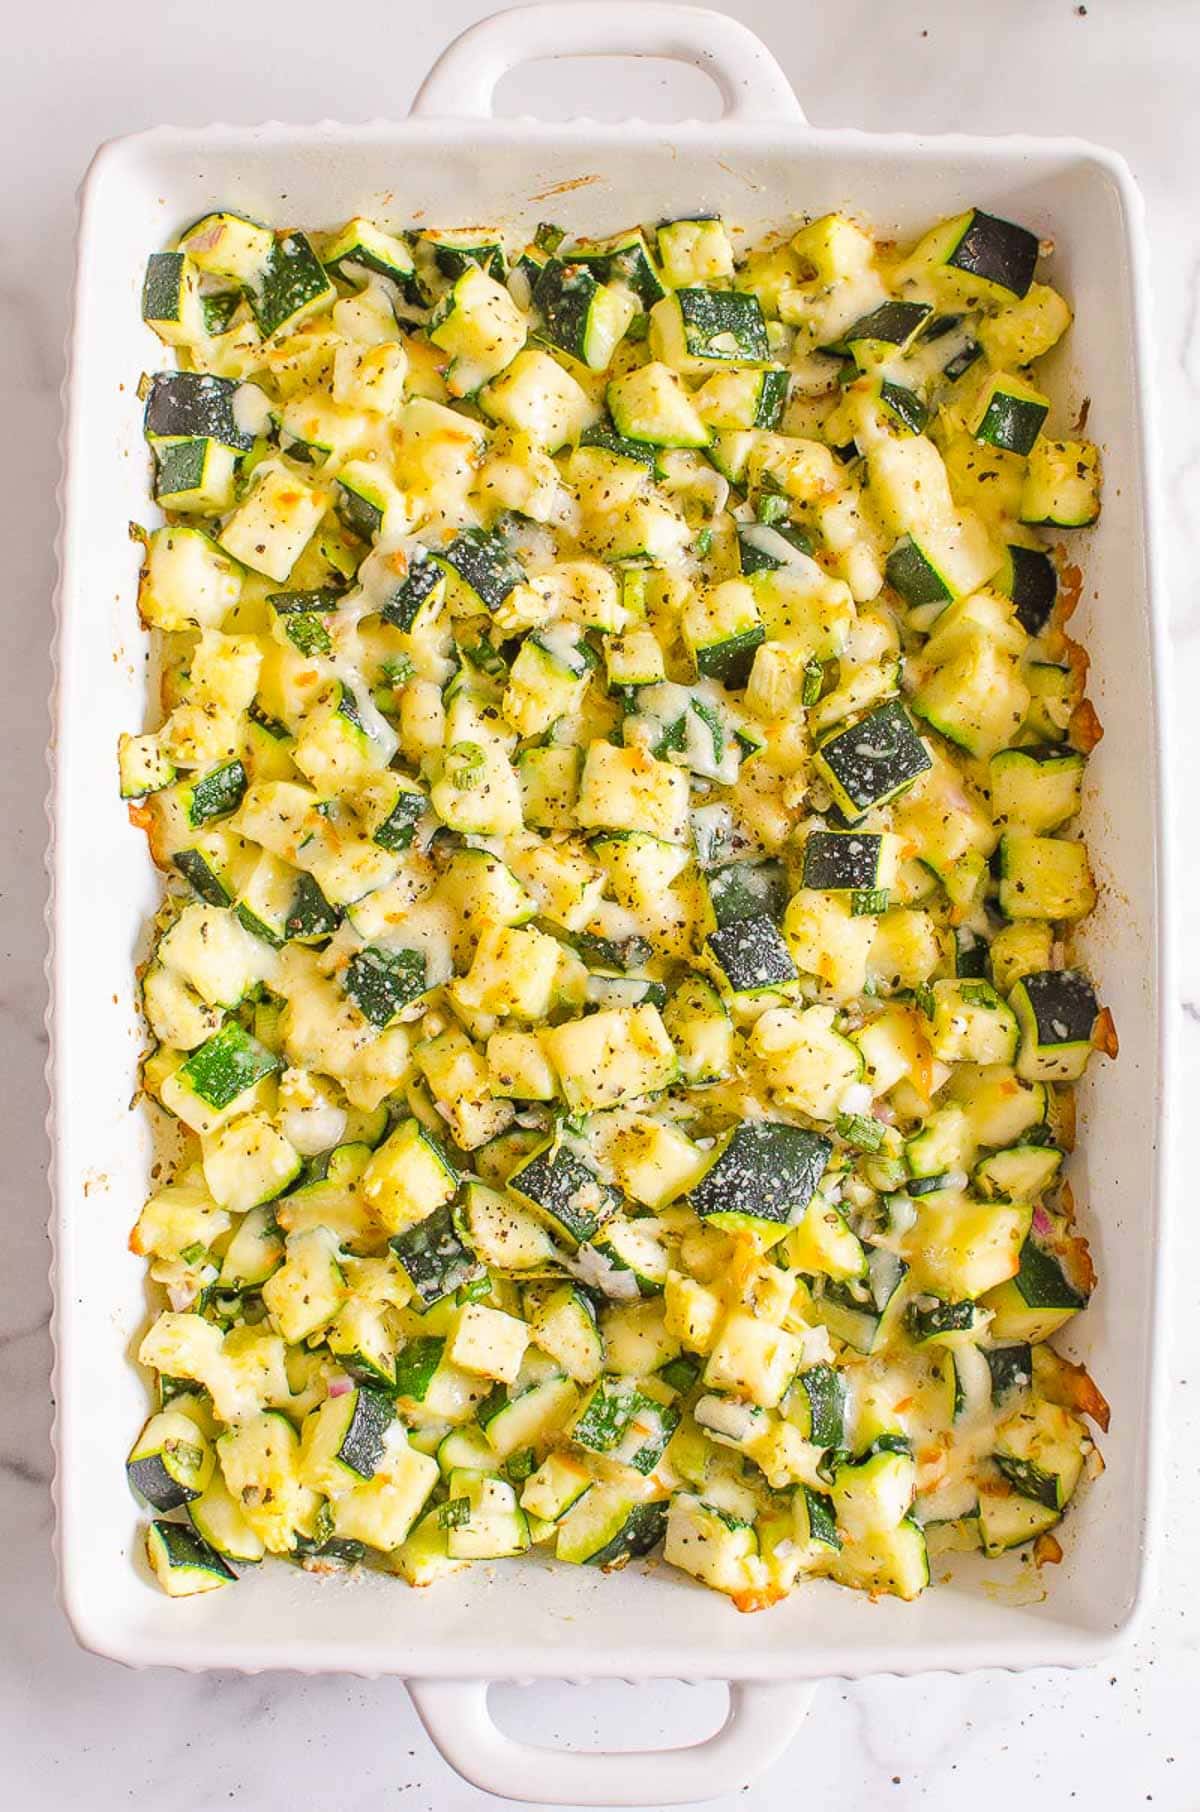 Healthy zucchini casserole baked in a white dish.